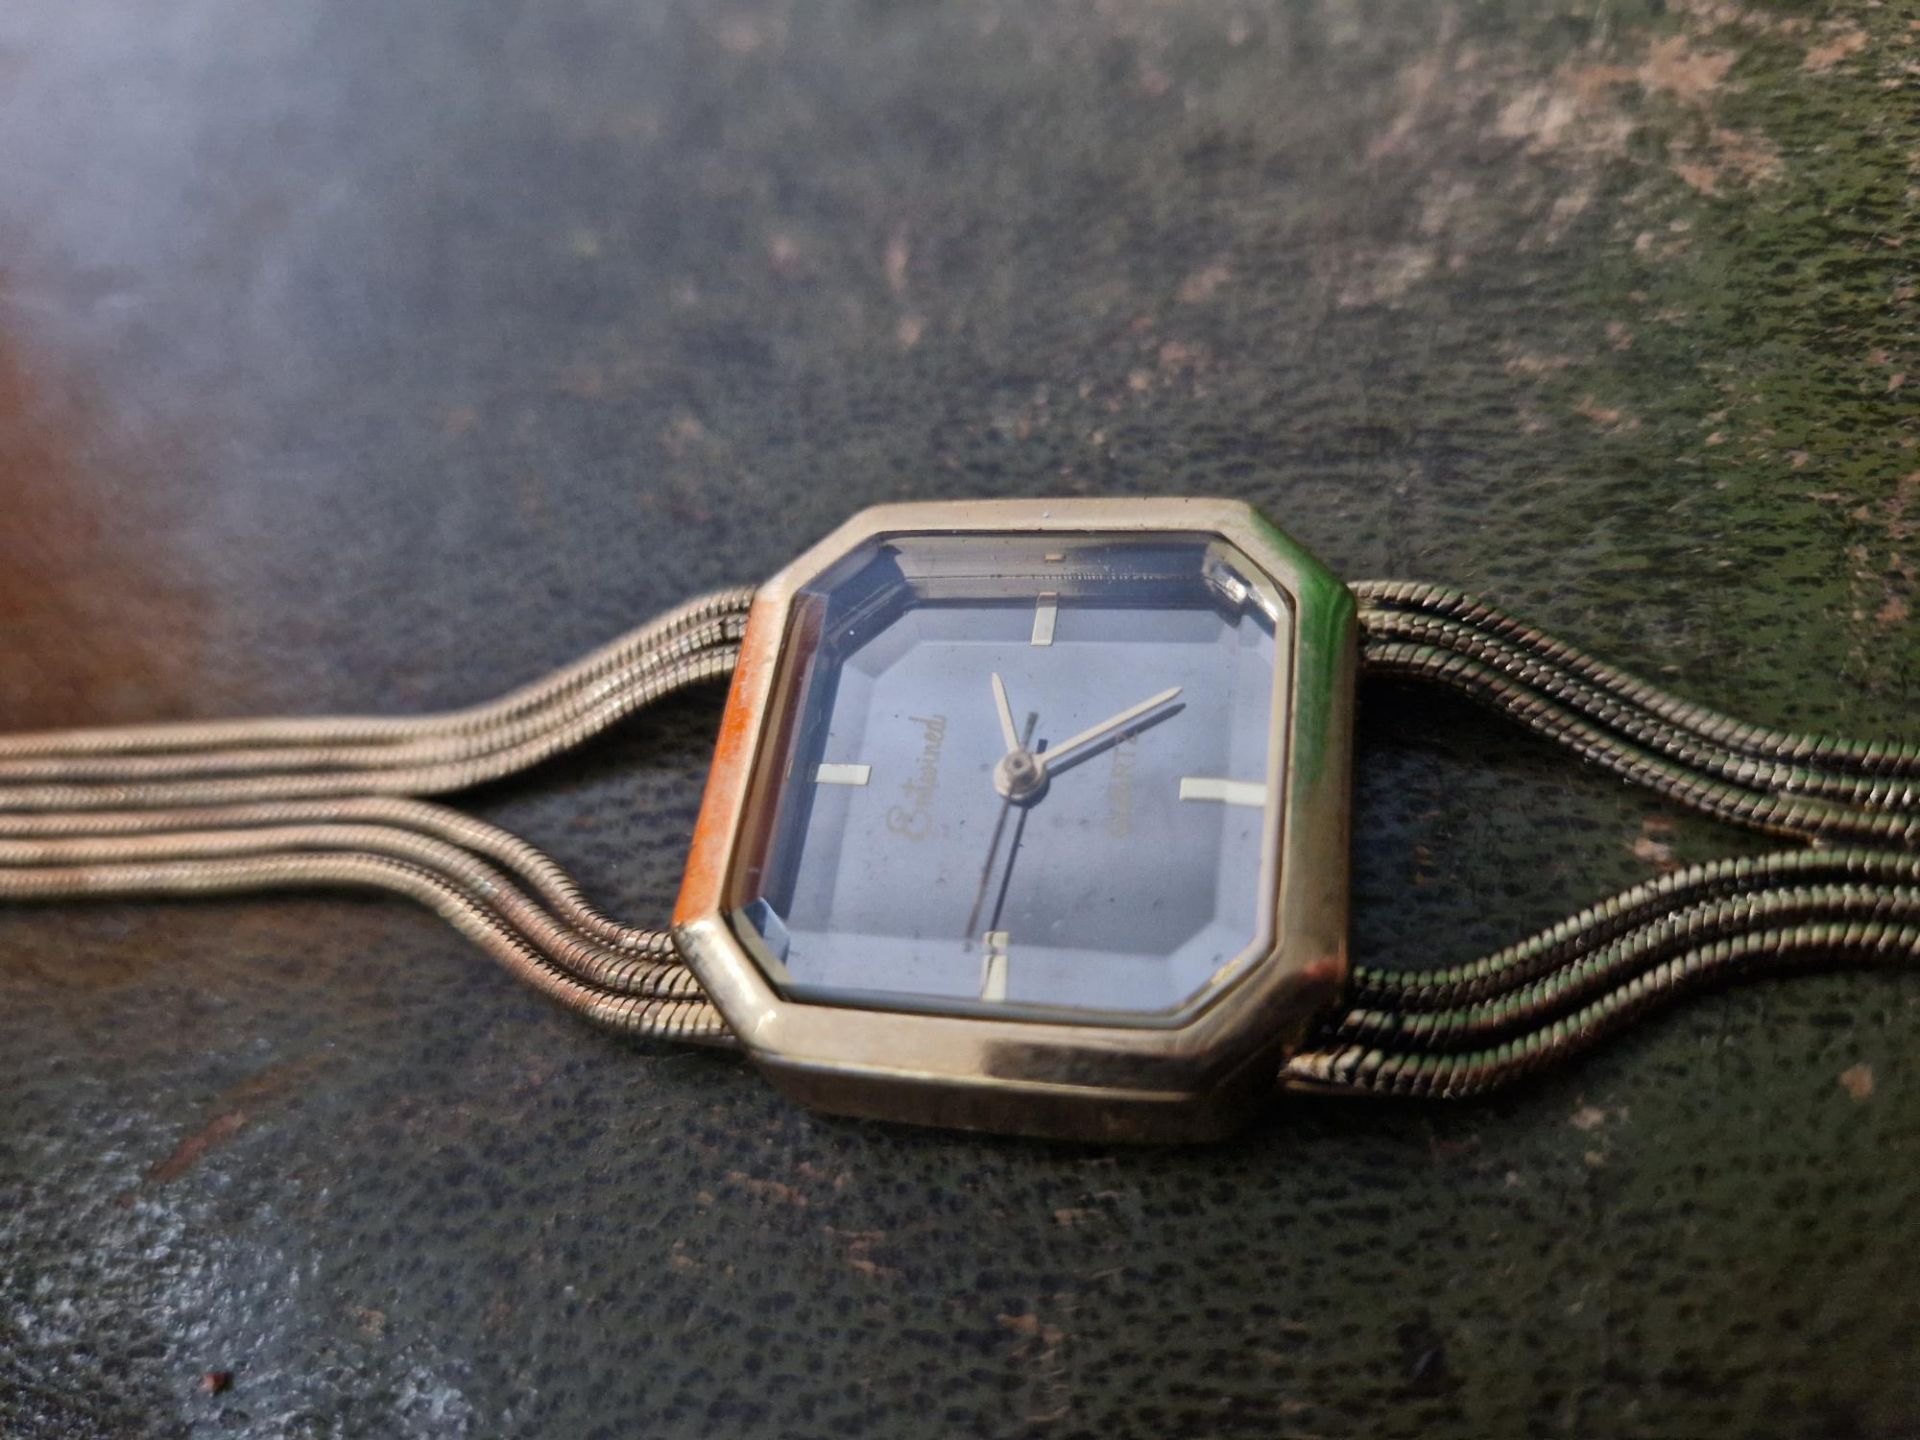 Entwined Watch - Image 2 of 2